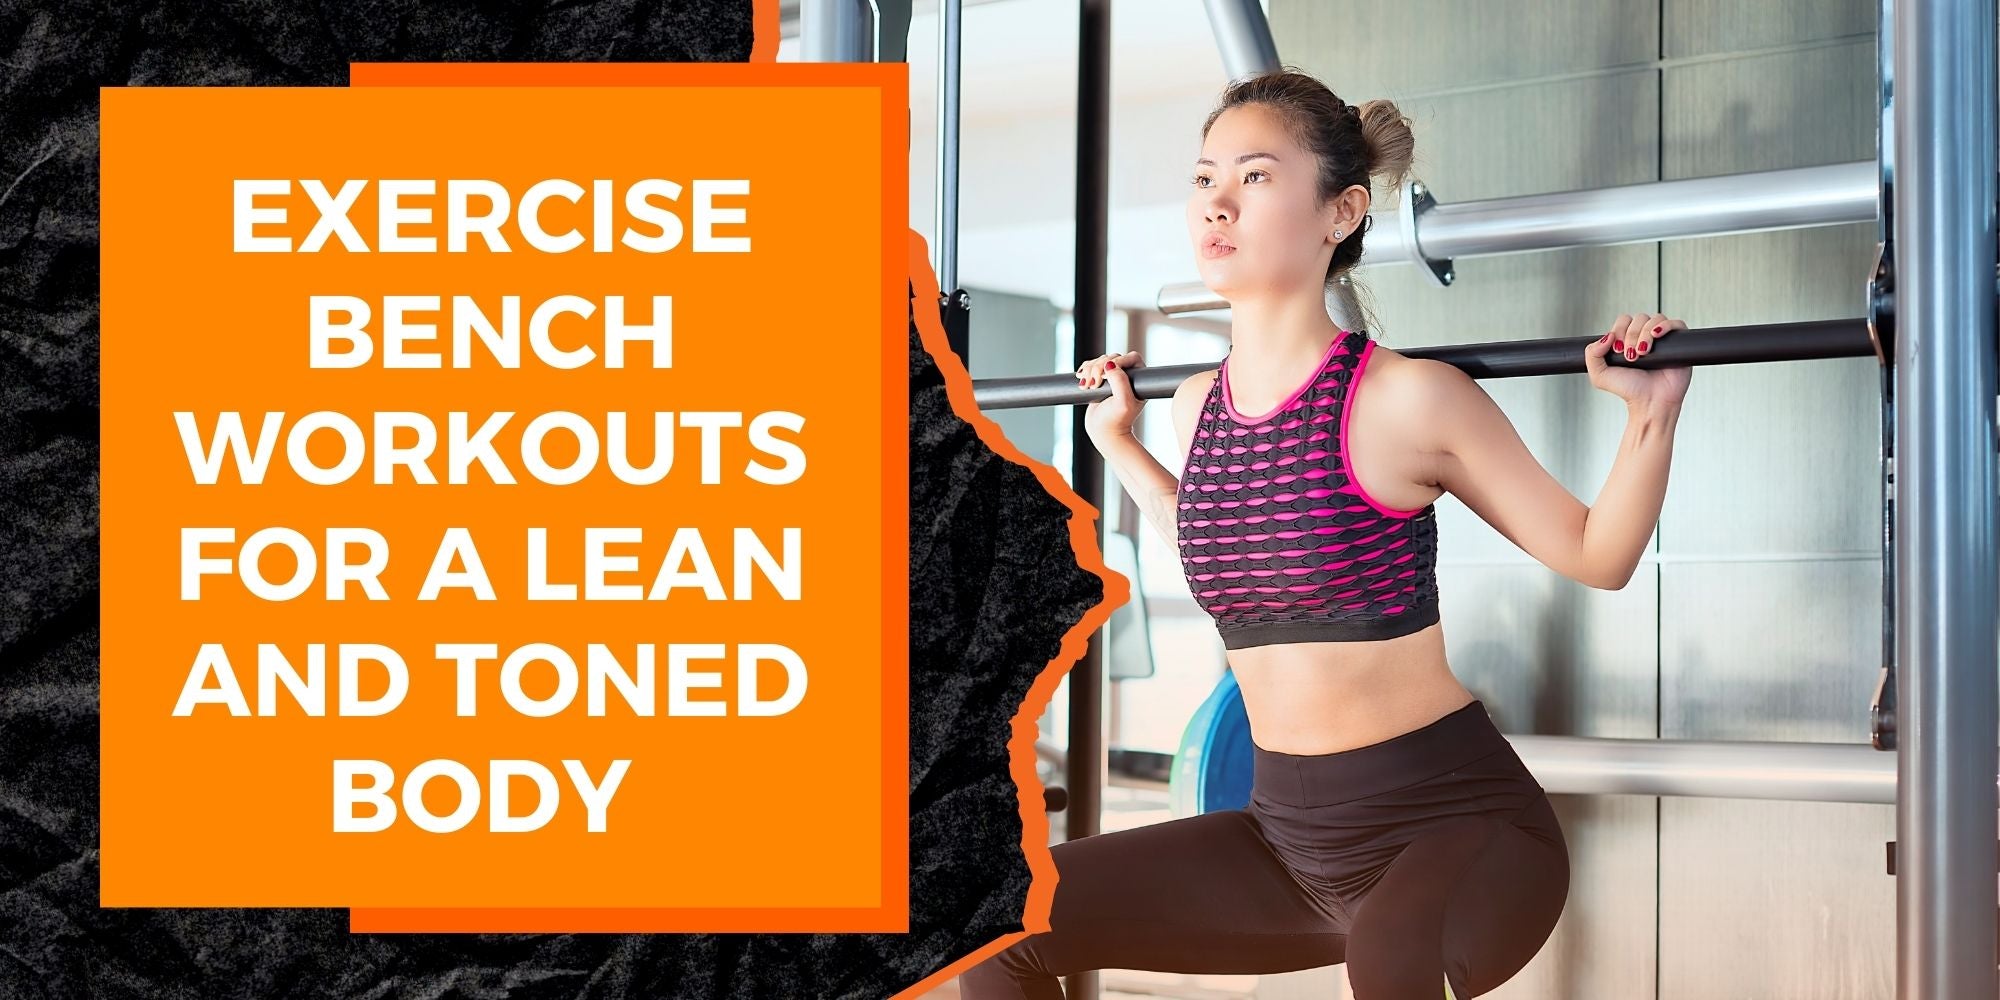 Exercise Bench Workouts for a Lean and Toned Body